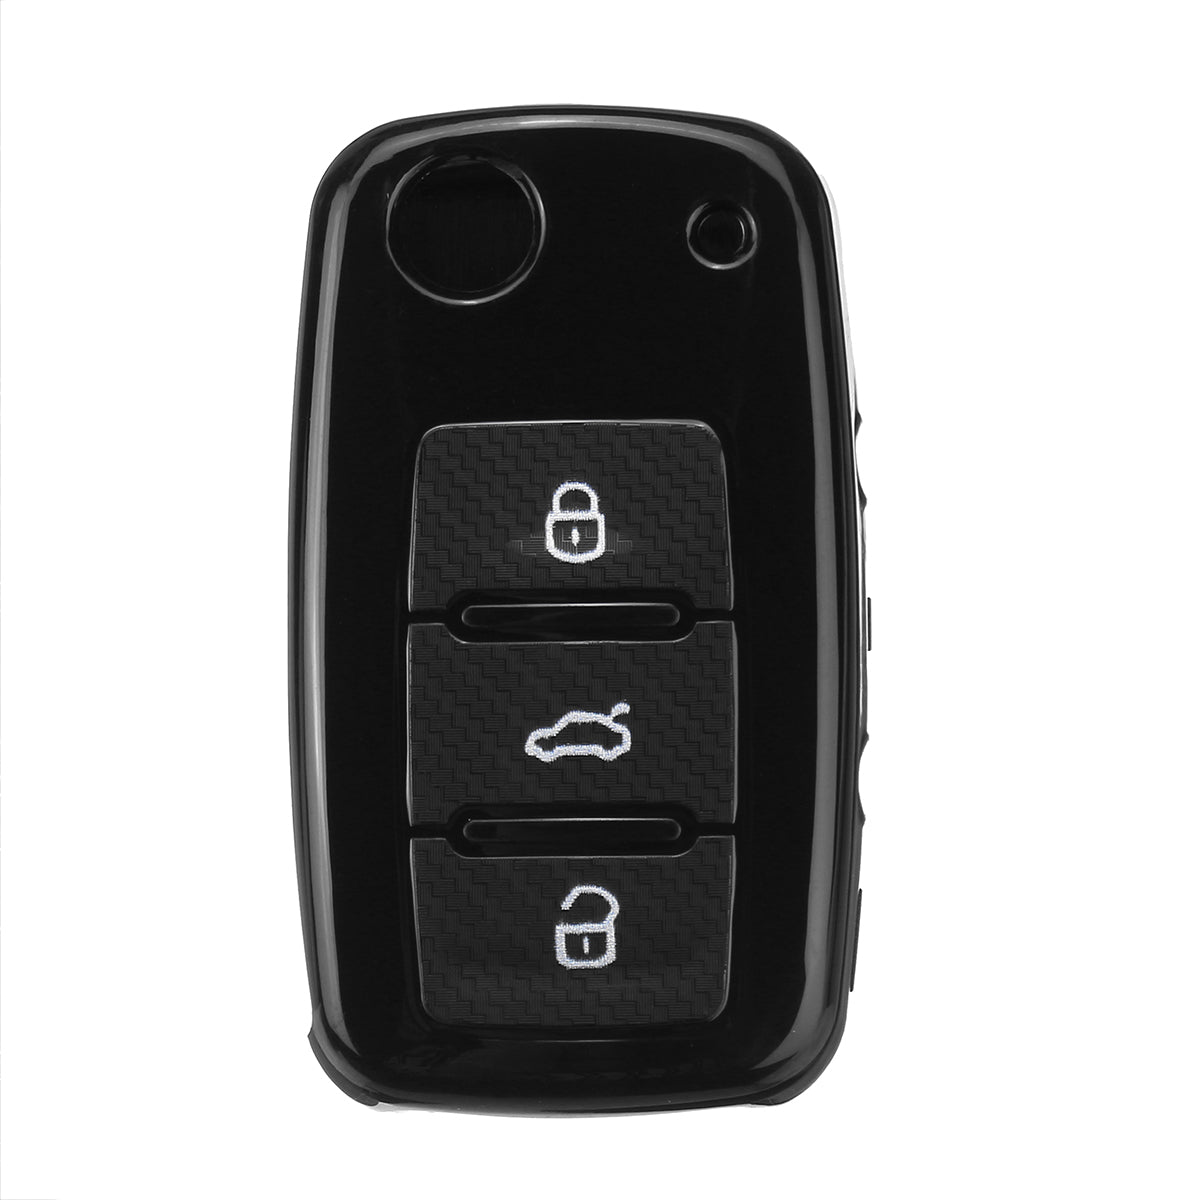 Car Key Cover Silicone TPU Protective Case With Belt Buckle Suitable For Volkswagen/Golf/Jetta/Skoda - Auto GoShop